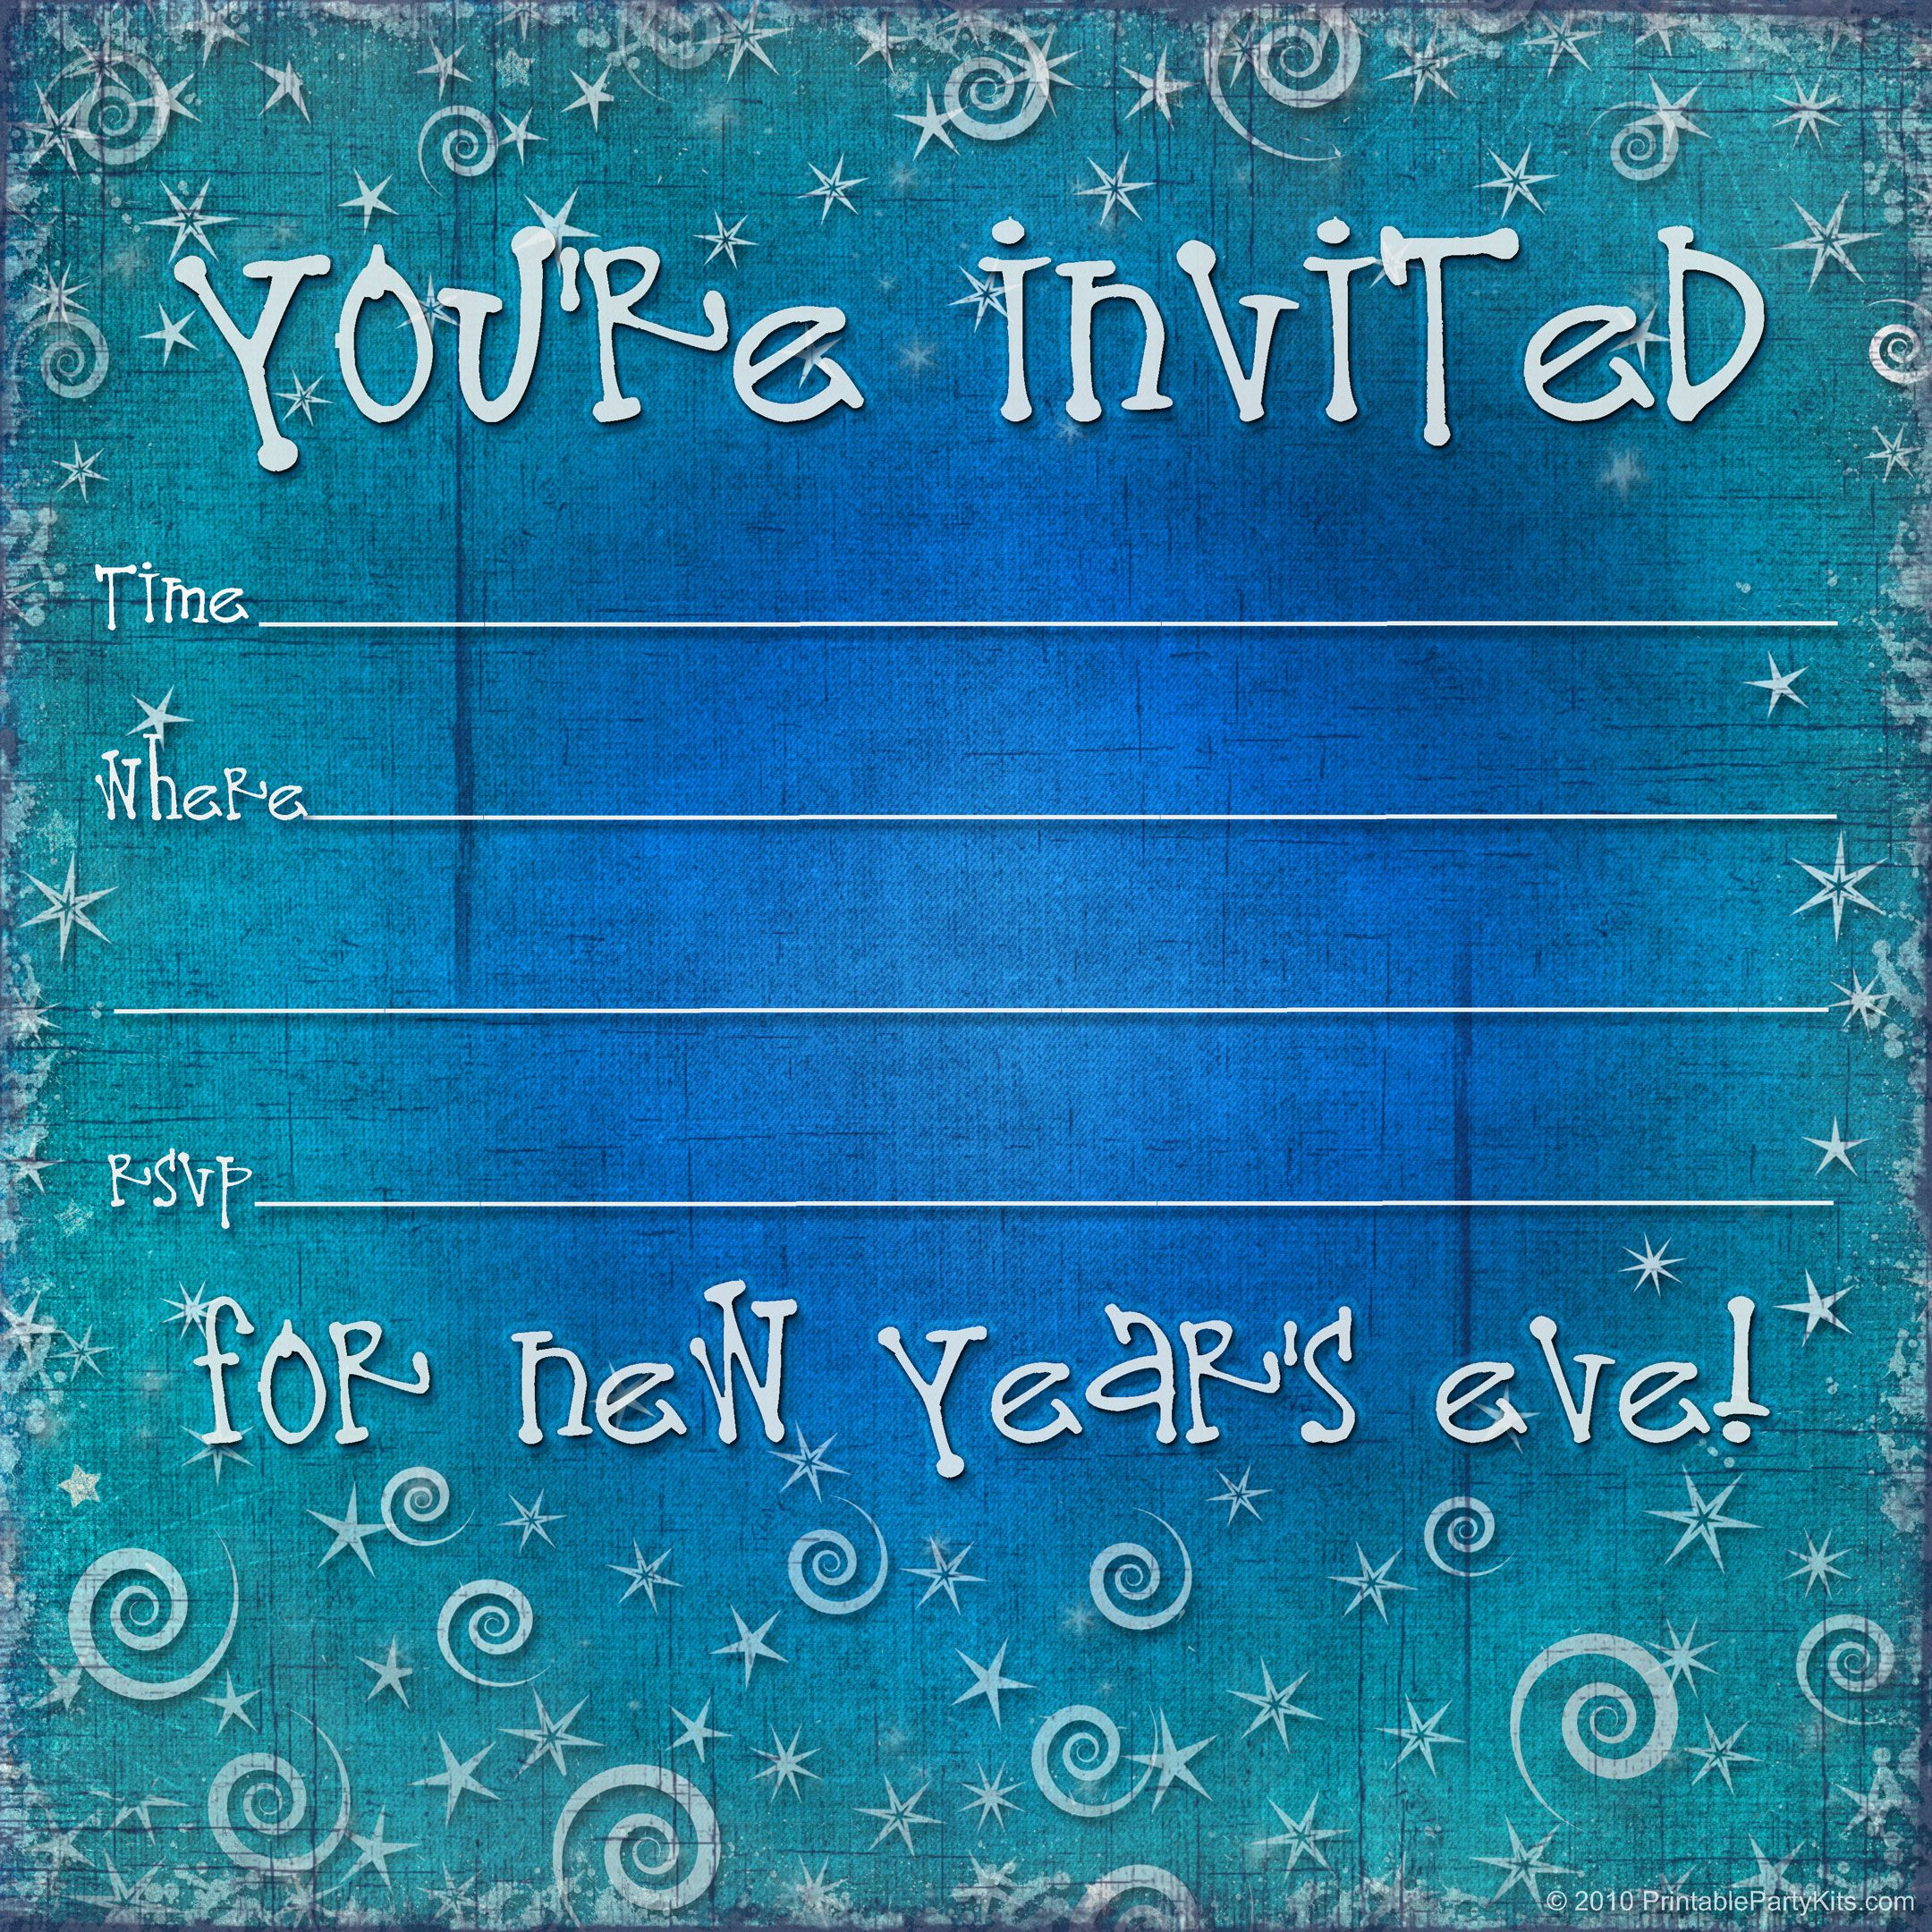 001 New Years Eve Invitations Template Ideas Archaicawful Invitation for sizing 2160 X 2160